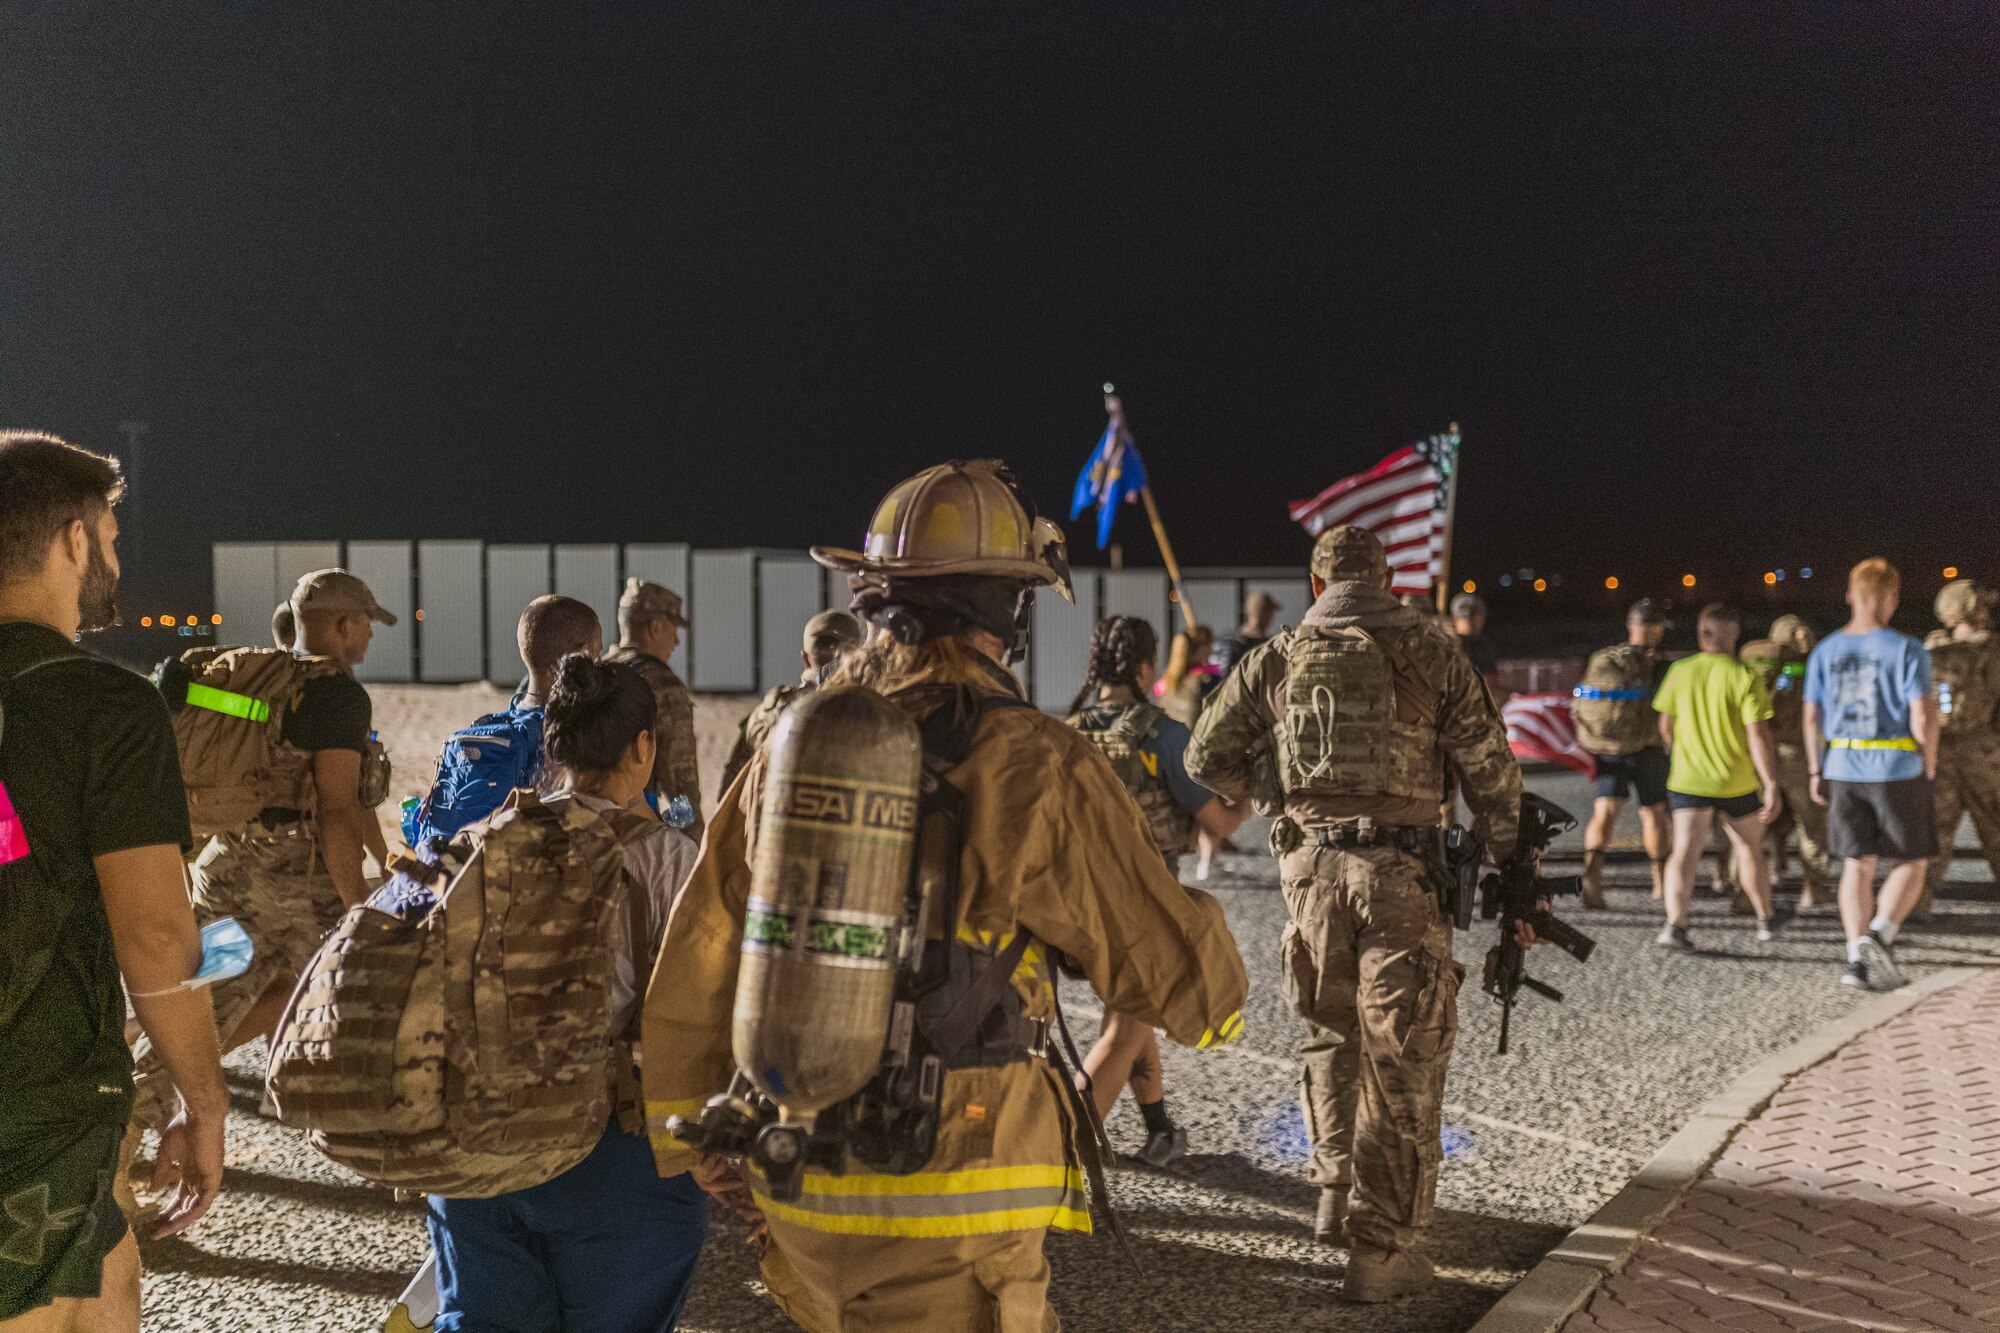 U.S. troops and coalition forces participated in the 20th Anniversary 9/11 Ceremony & Memorial 5K ruck march at Ali Al Salem Air Base, Kuwait, September 11, 2021. (Courtesy photo)